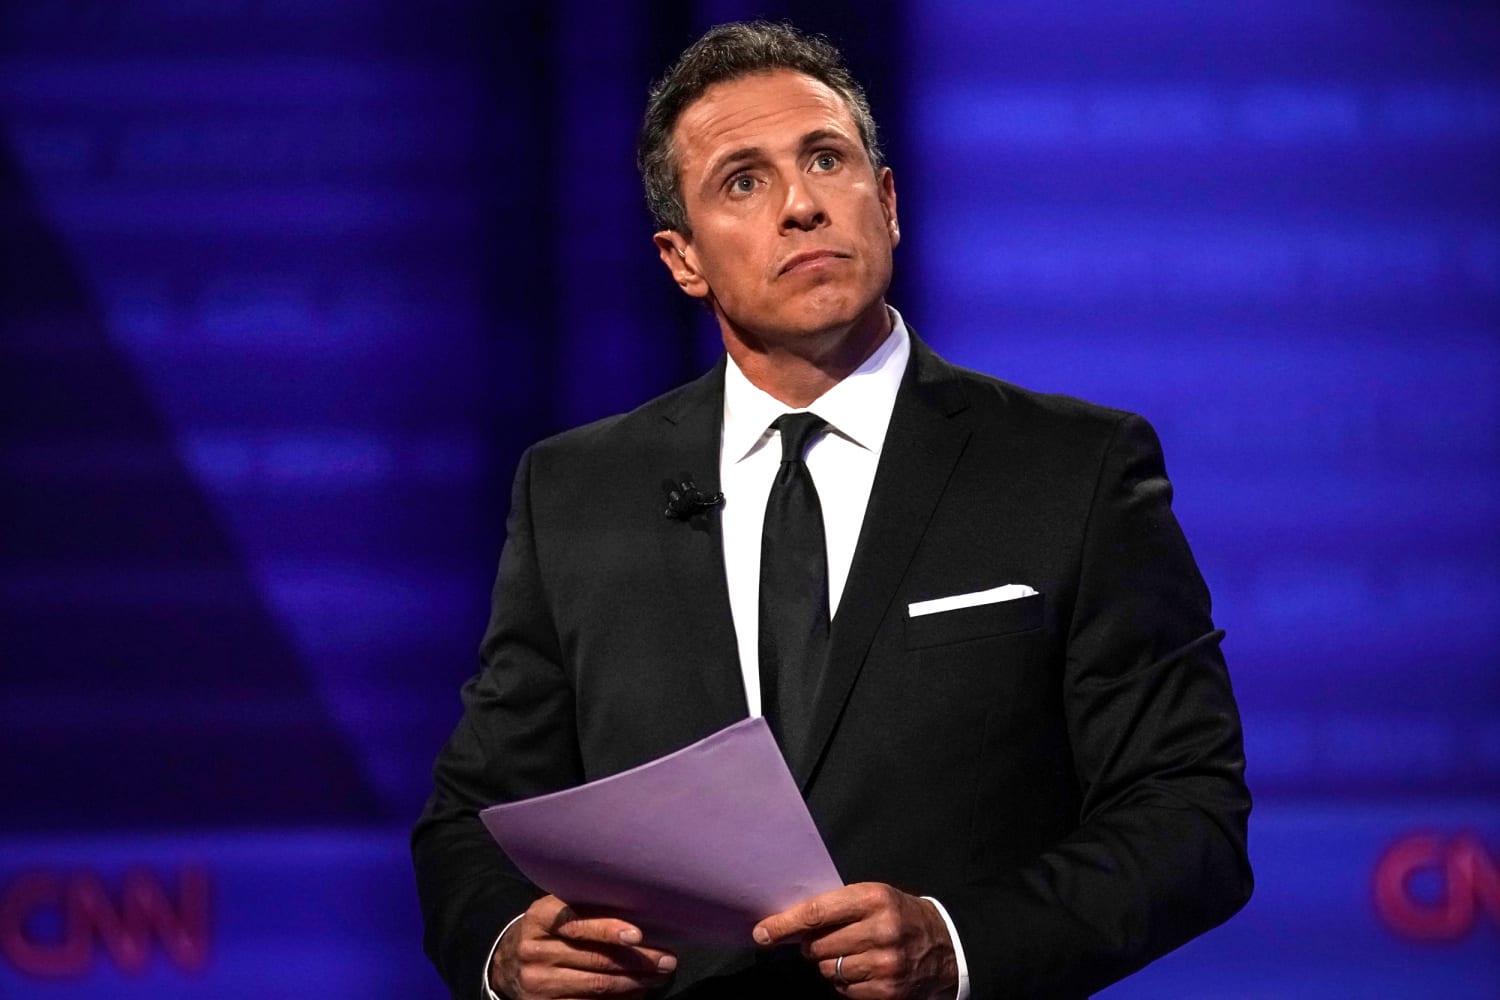 CNN fires Chris Cuomo for aiding his brother against sexual misconduct allegations